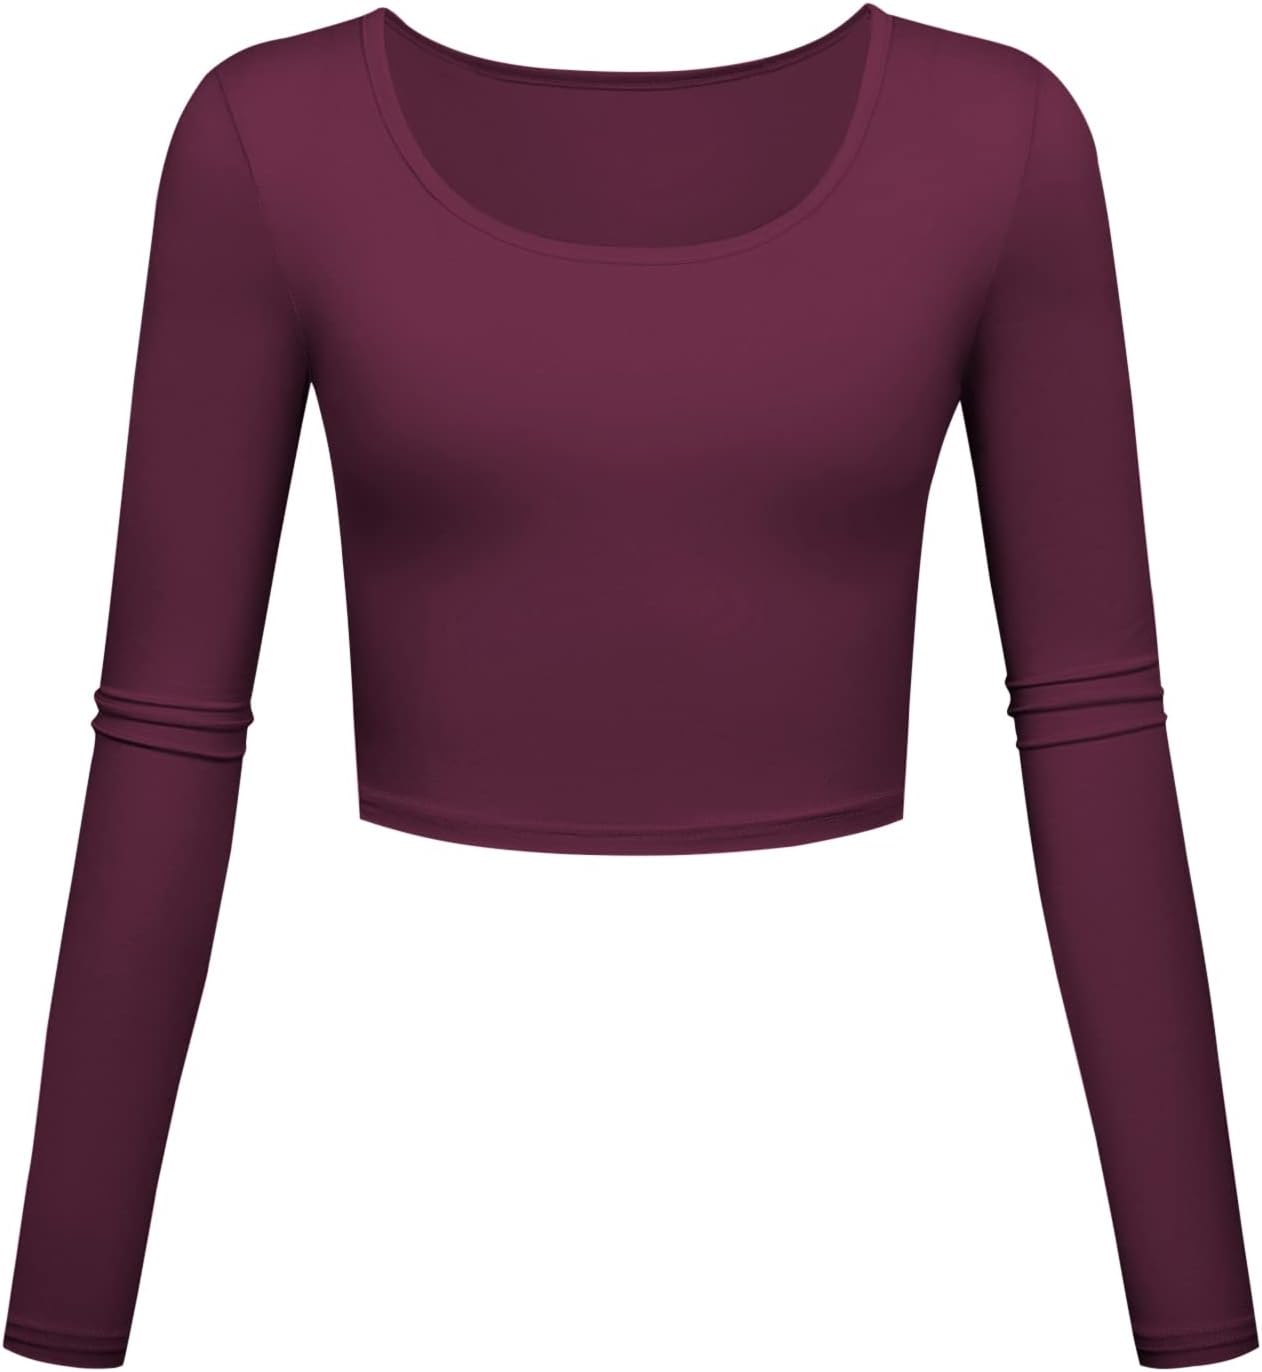 Ends Tonight! Kindcall Lightweight Basic Crop Tops - Extra 14% Off! Your Exclusive Discount Awaits - Limited Offer!